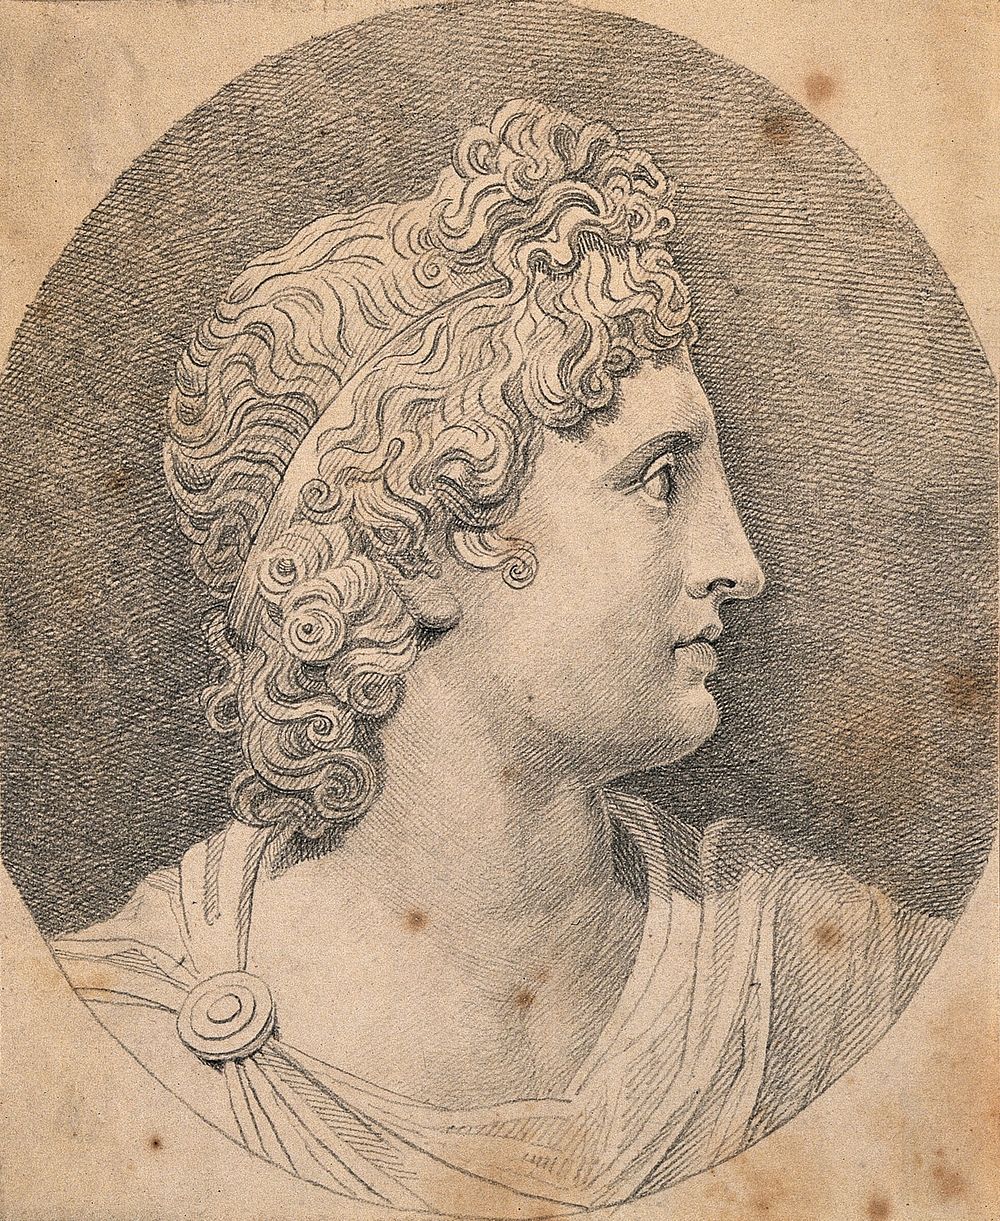 Head of the Apollo Belvedere statue in the Vatican. Drawing, c. 1791.